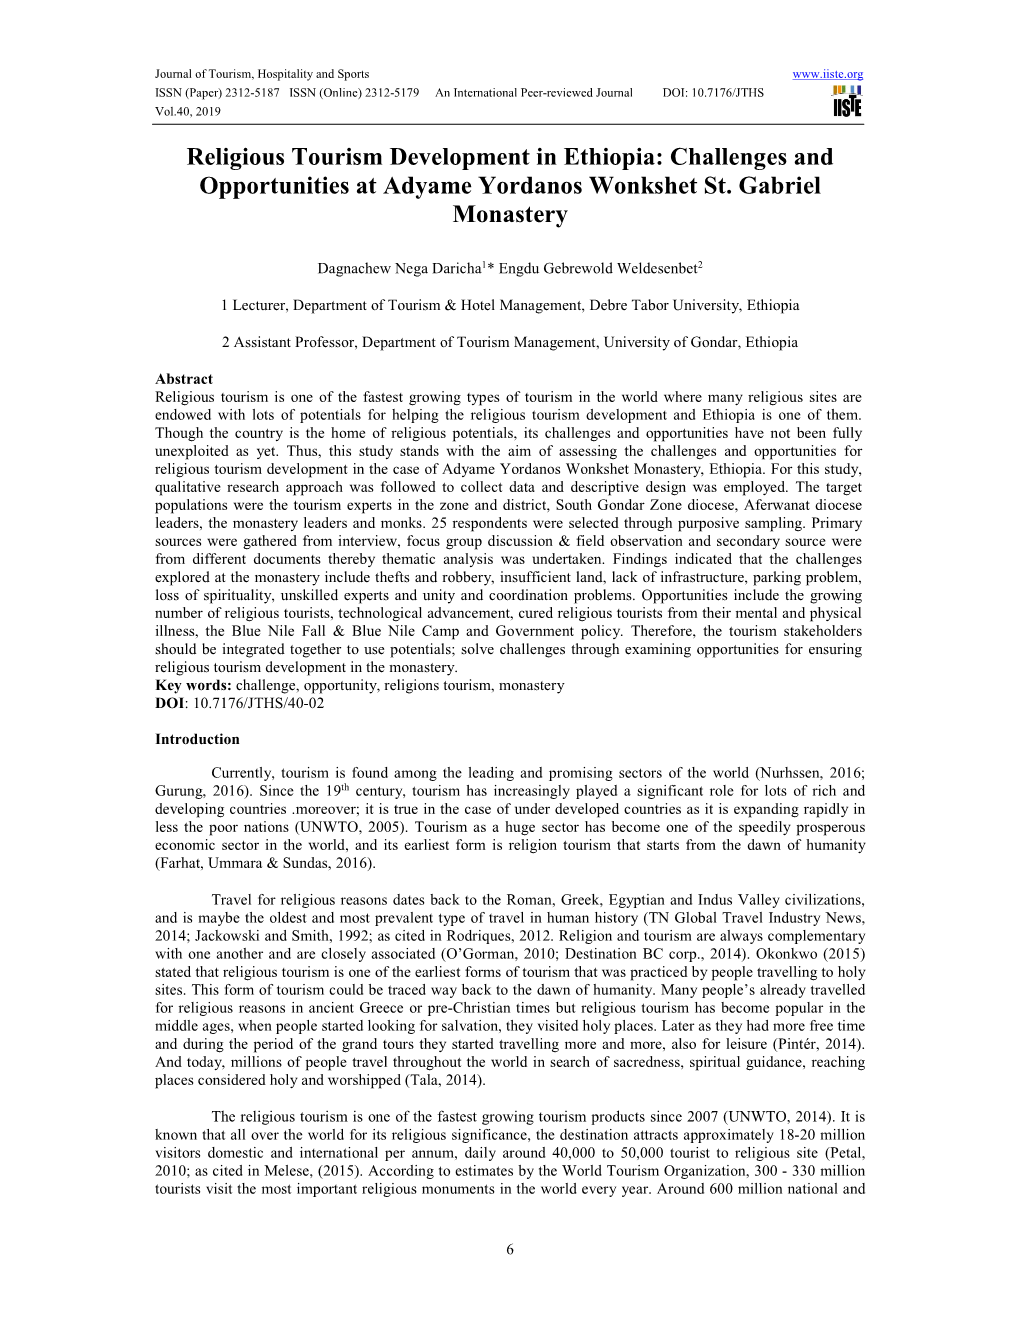 Religious Tourism Development in Ethiopia: Challenges and Opportunities at Adyame Yordanos Wonkshet St